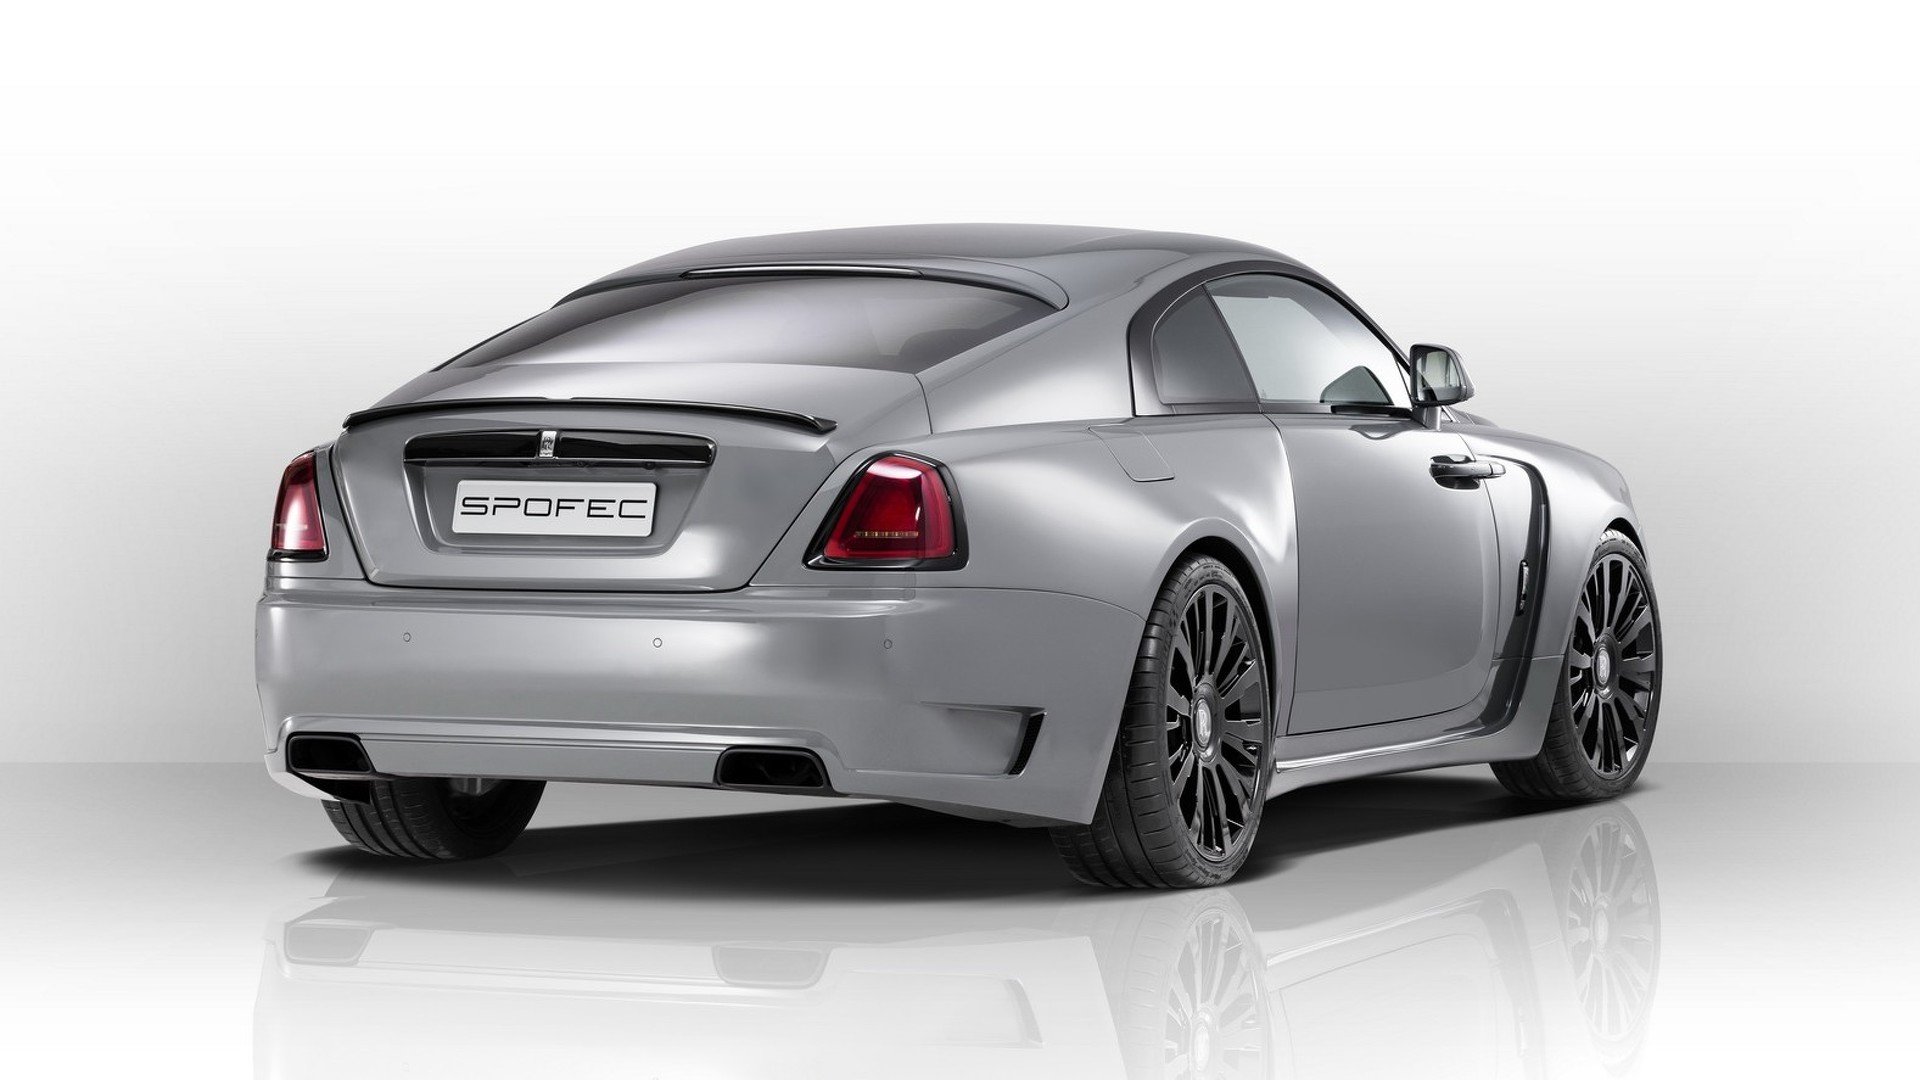 Vehicles Rolls-Royce Wraith HD Wallpaper | Background Image